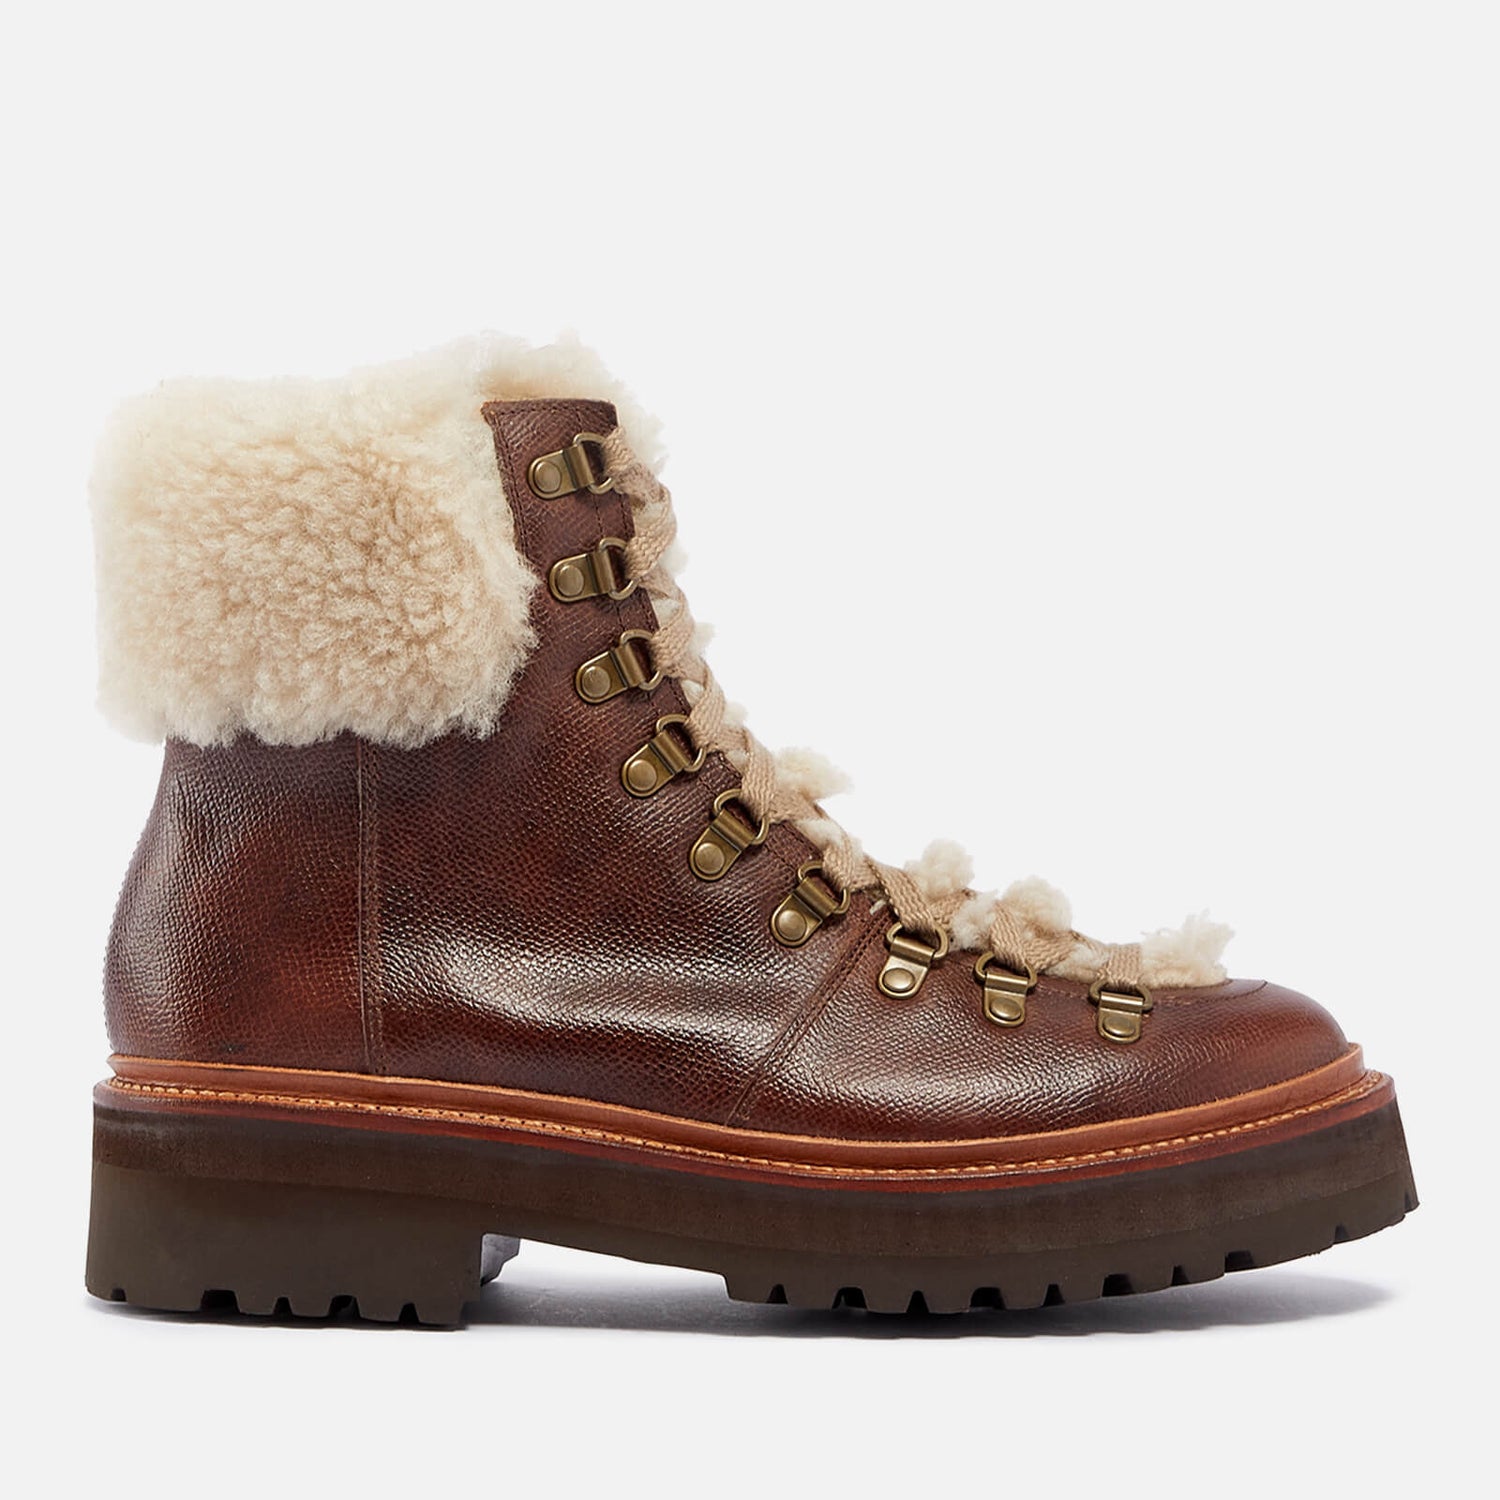 Grenson Nettie Leather and Shearling Hiking-Style Boots